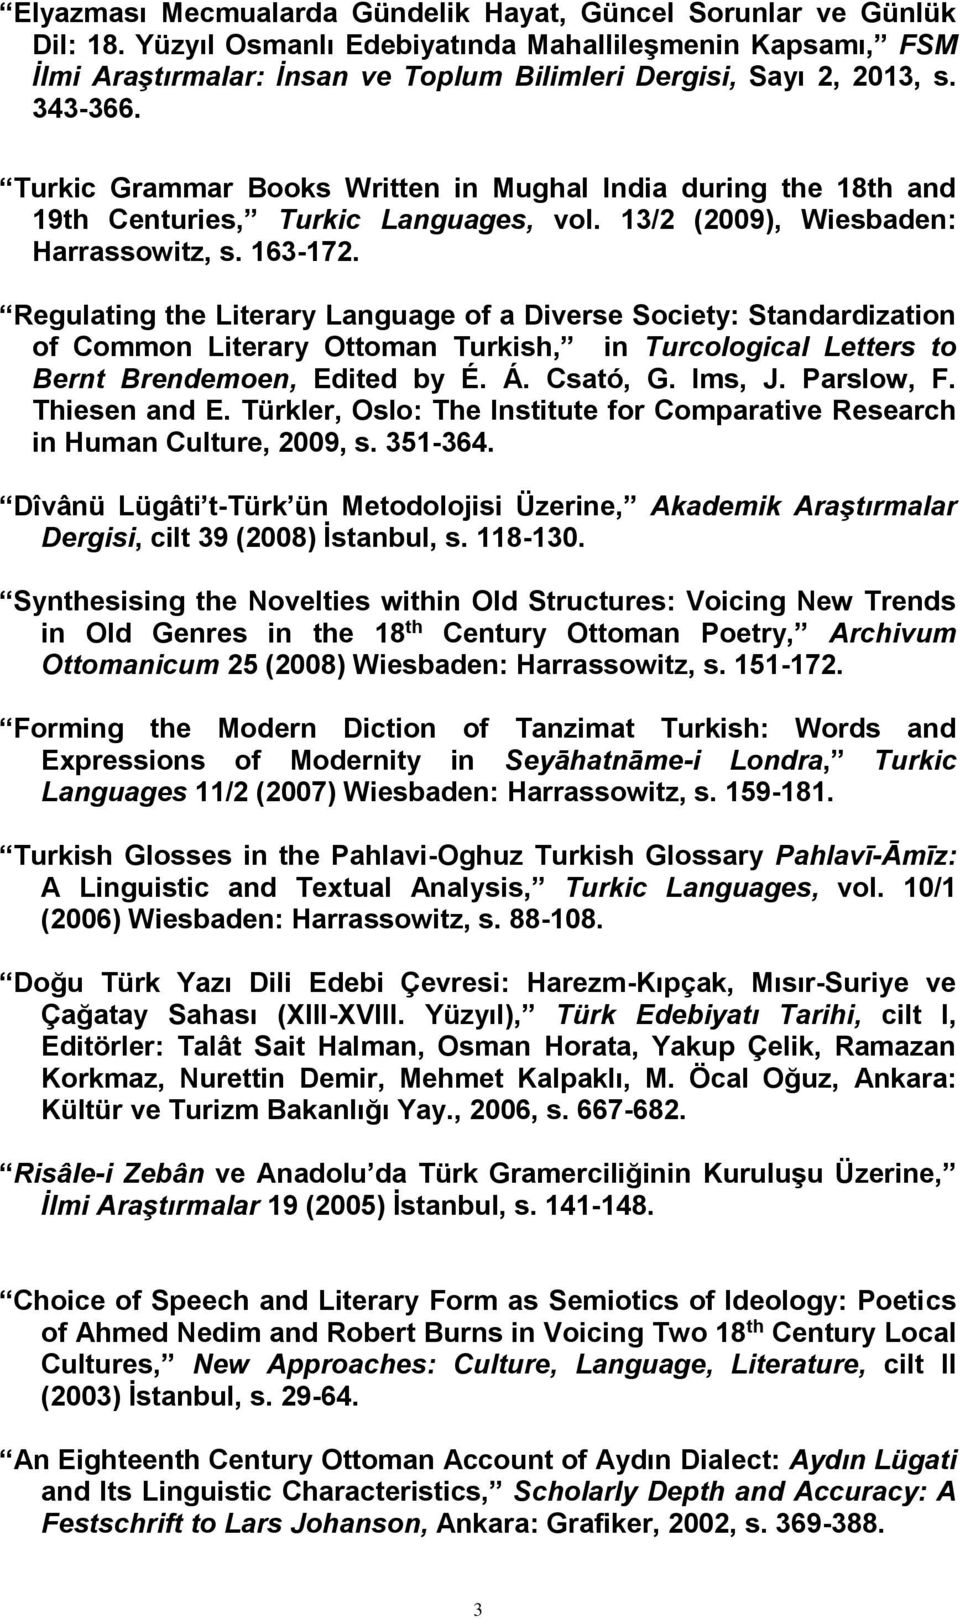 Regulating the Literary Language of a Diverse Society: Standardization of Common Literary Ottoman Turkish, in Turcological Letters to Bernt Brendemoen, Edited by É. Á. Csató, G. Ims, J. Parslow, F.